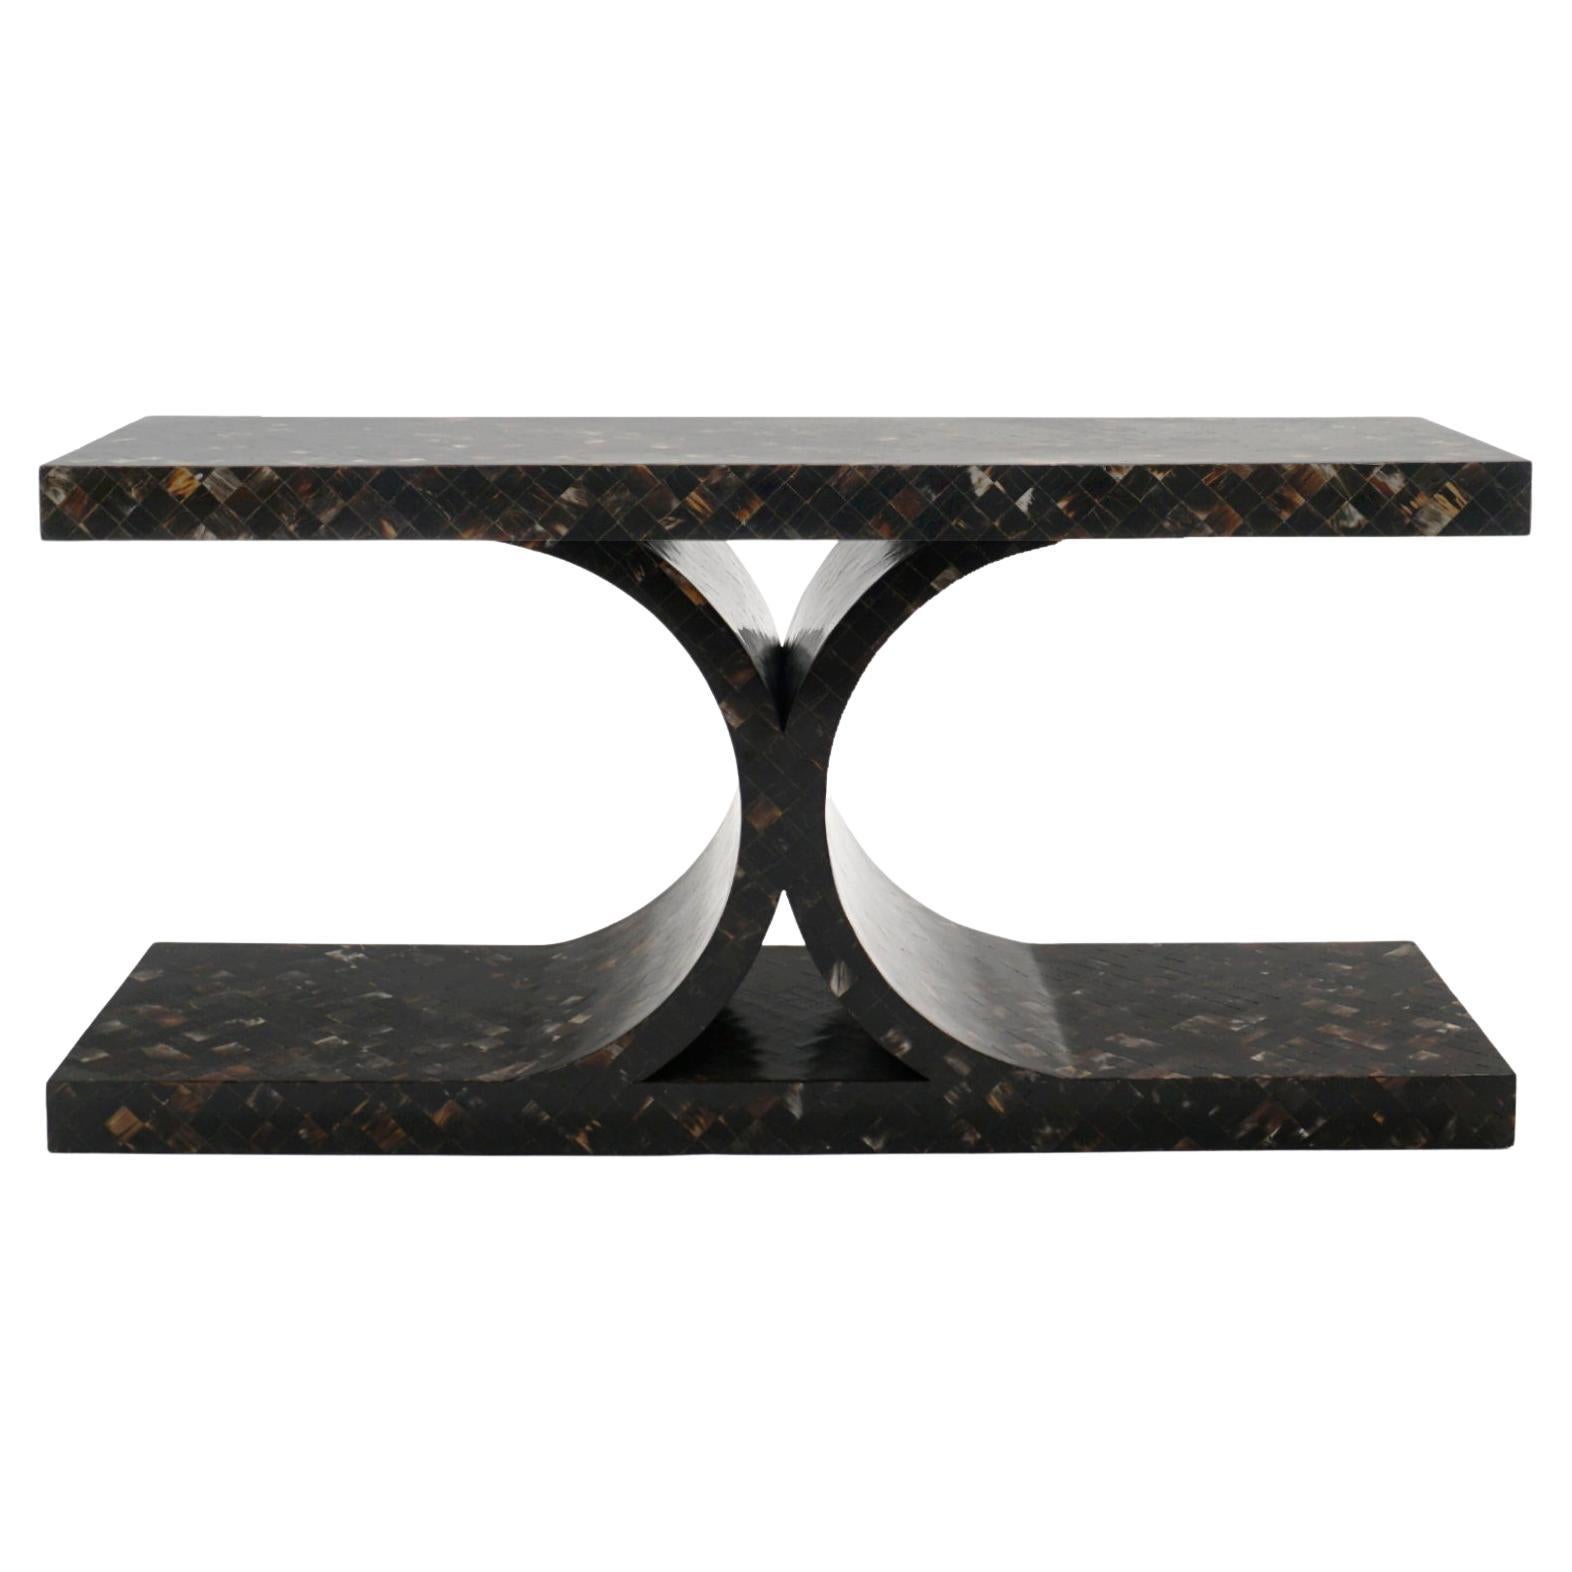 Carved Horn Inlay Console / Sofa Table by Karl Springer, Ltd. USA, c. 1970